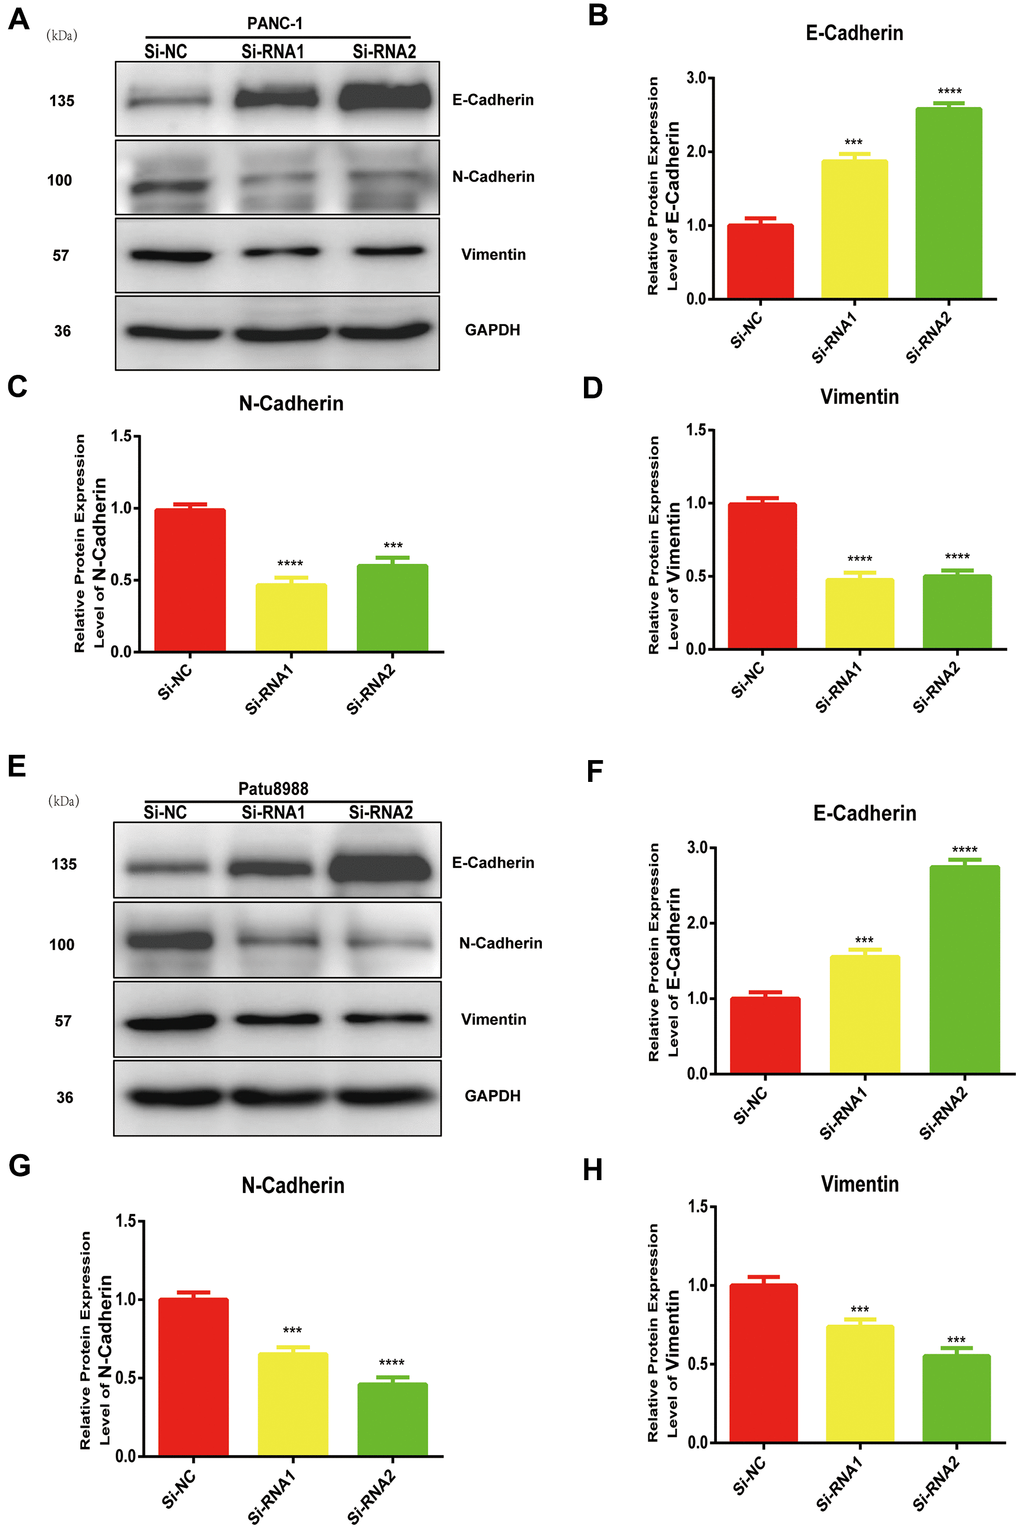 NUDCD1 knockdown inhibited the EMT process in PC cells. (A–D) NUDCD1 knockdown decreased the expression of N-cadherin and vimentin and upregulated the expression of E-cadherin in PANC-1 cells. (E–H) NUDCD1 knockdown decreased the expression of N-cadherin and vimentin, and upregulated the expression of E-cadherin in Patu8988 cells. ***p